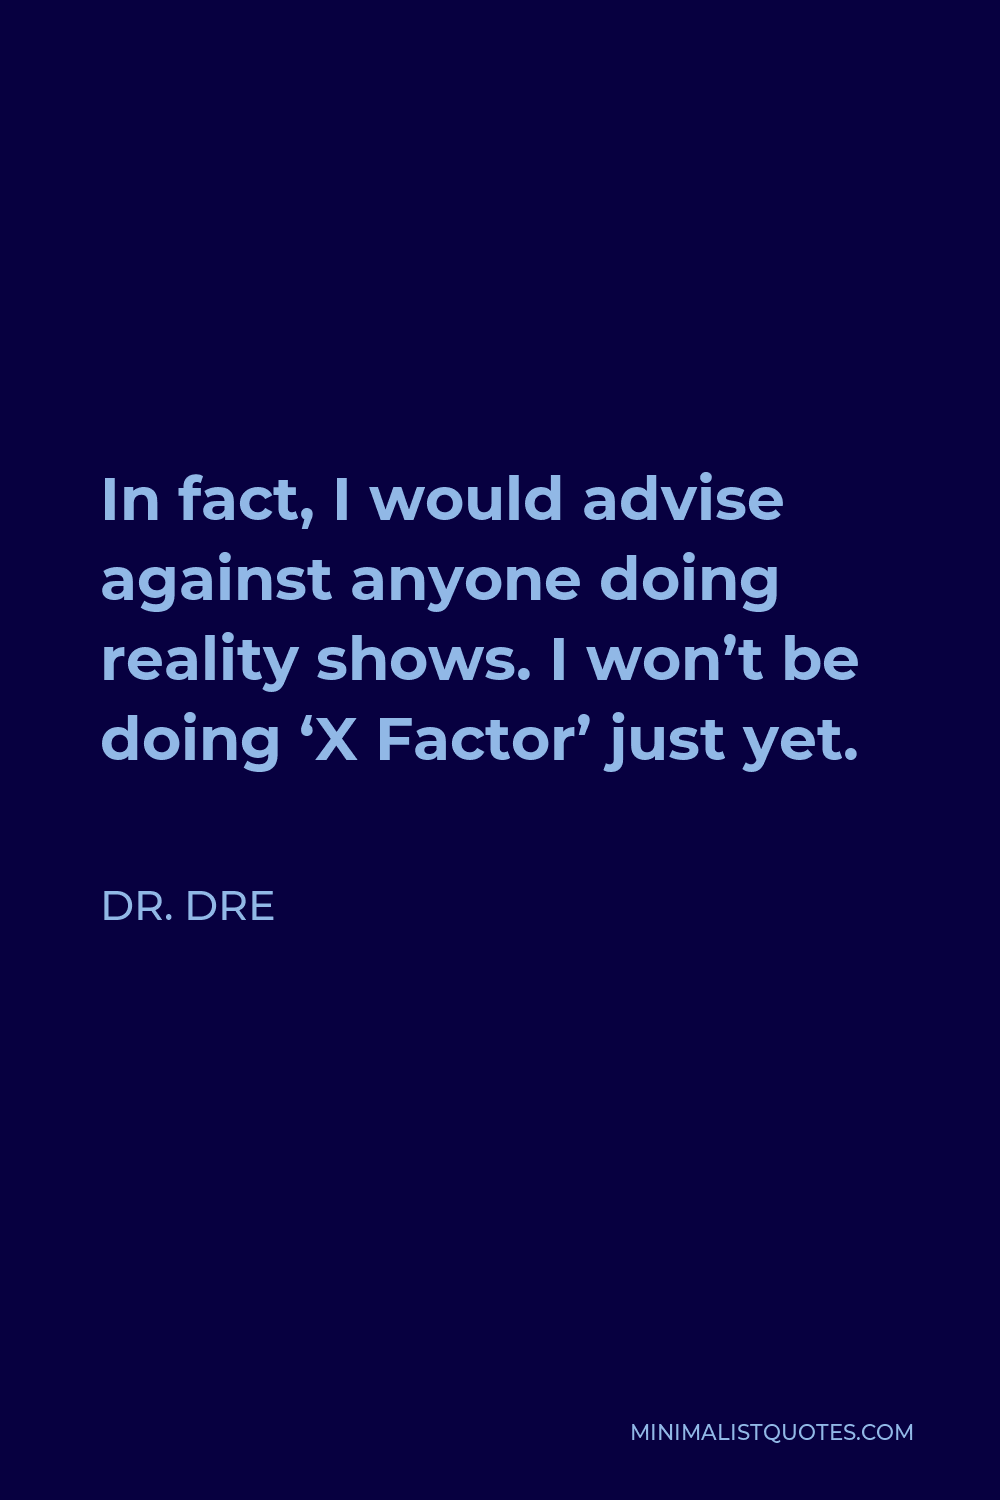 Dr. Dre Quote - In fact, I would advise against anyone doing reality shows. I won’t be doing ‘X Factor’ just yet.